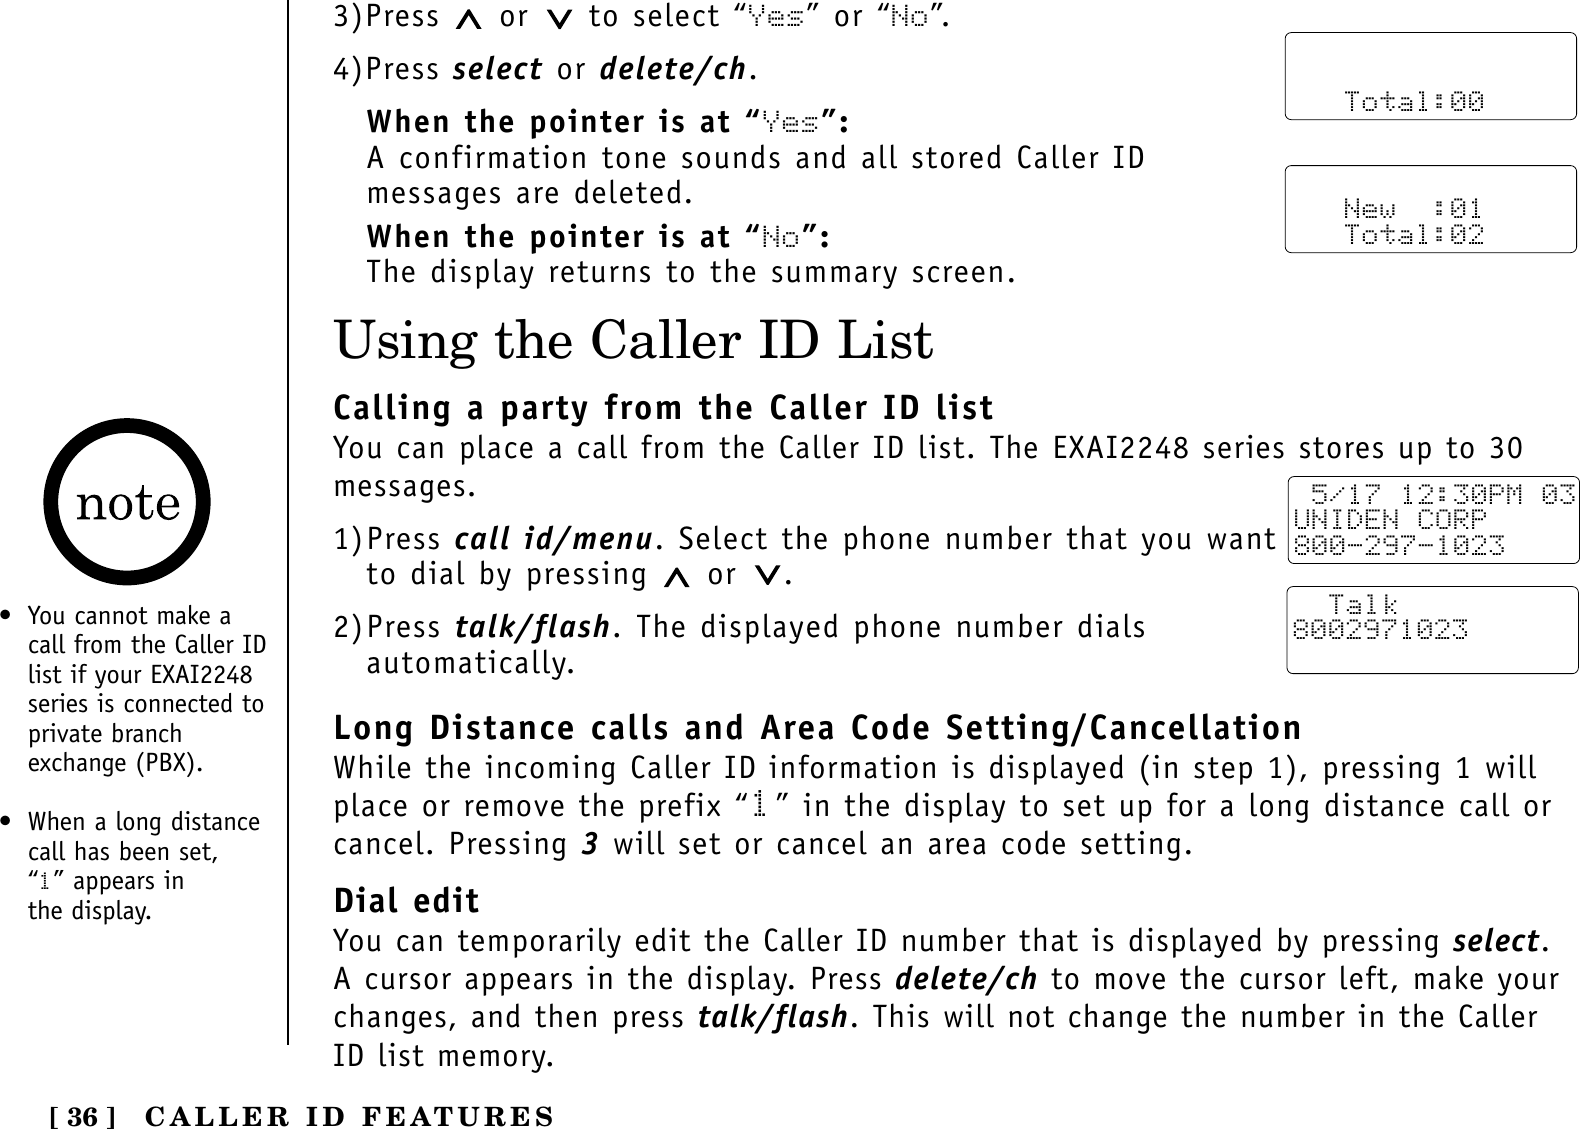 [ 36 ]Using the Caller ID List• You cannot make acall from the Caller IDlist if your EXAI2248series is connected toprivate branchexchange (PBX).• When a long distancecall has been set, “1” appears in the display.3)Press  or to select “Yes” or “No”.4)Press select or delete/ch.When the pointer is at “Yes”:A confirmation tone sounds and all stored Caller IDmessages are deleted.When the pointer is at “No”:The display returns to the summary screen.      Total:00   New  :01   Total:02Calling a party from the Caller ID listYou can place a call from the Caller ID list. The EXAI2248 series stores up to 30messages.1)Press call id/menu. Select the phone number that you wantto dial by pressing  or .2)Press talk/flash. The displayed phone number dialsautomatically.Long Distance calls and Area Code Setting/CancellationWhile the incoming Caller ID information is displayed (in step 1), pressing 1 willplace or remove the prefix “1” in the display to set up for a long distance call orcancel. Pressing 3will set or cancel an area code setting.Dial editYou can temporarily edit the Caller ID number that is displayed by pressing select.A cursor appears in the display. Press delete/ch to move the cursor left, make yourchanges, and then press talk/flash. This will not change the number in the CallerID list memory.  5/17 12:30PM 03UNIDEN CORP800-297-1023  Talk8002971023CALLER ID FEATURES